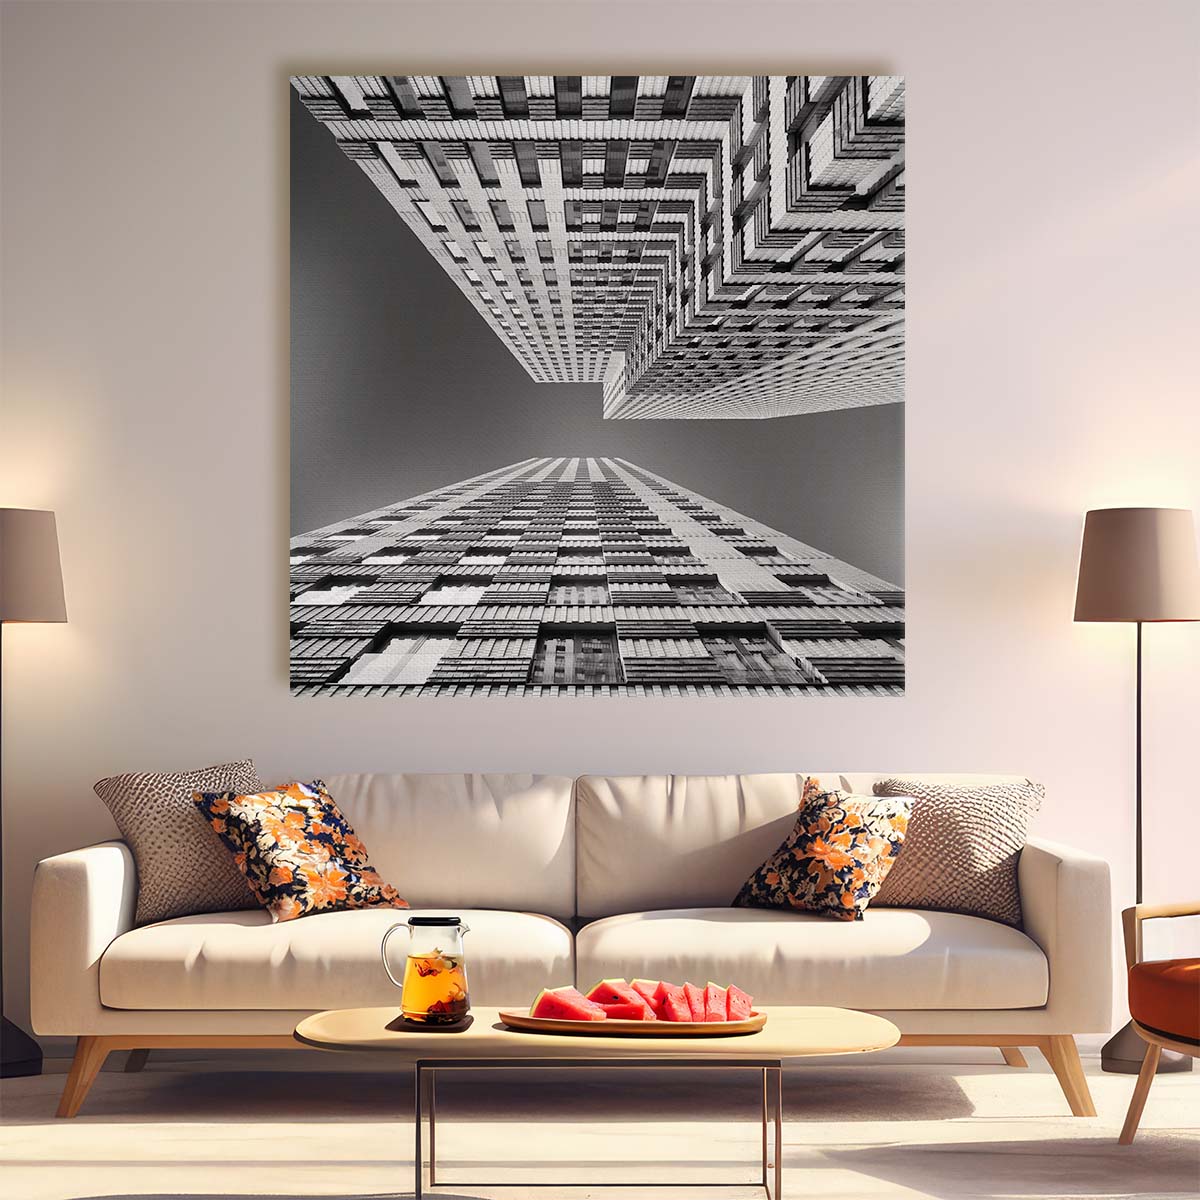 Monochrome Architectural Photography of Amsterdam Zuidas Skyline Wall Art by Luxuriance Designs. Made in USA.